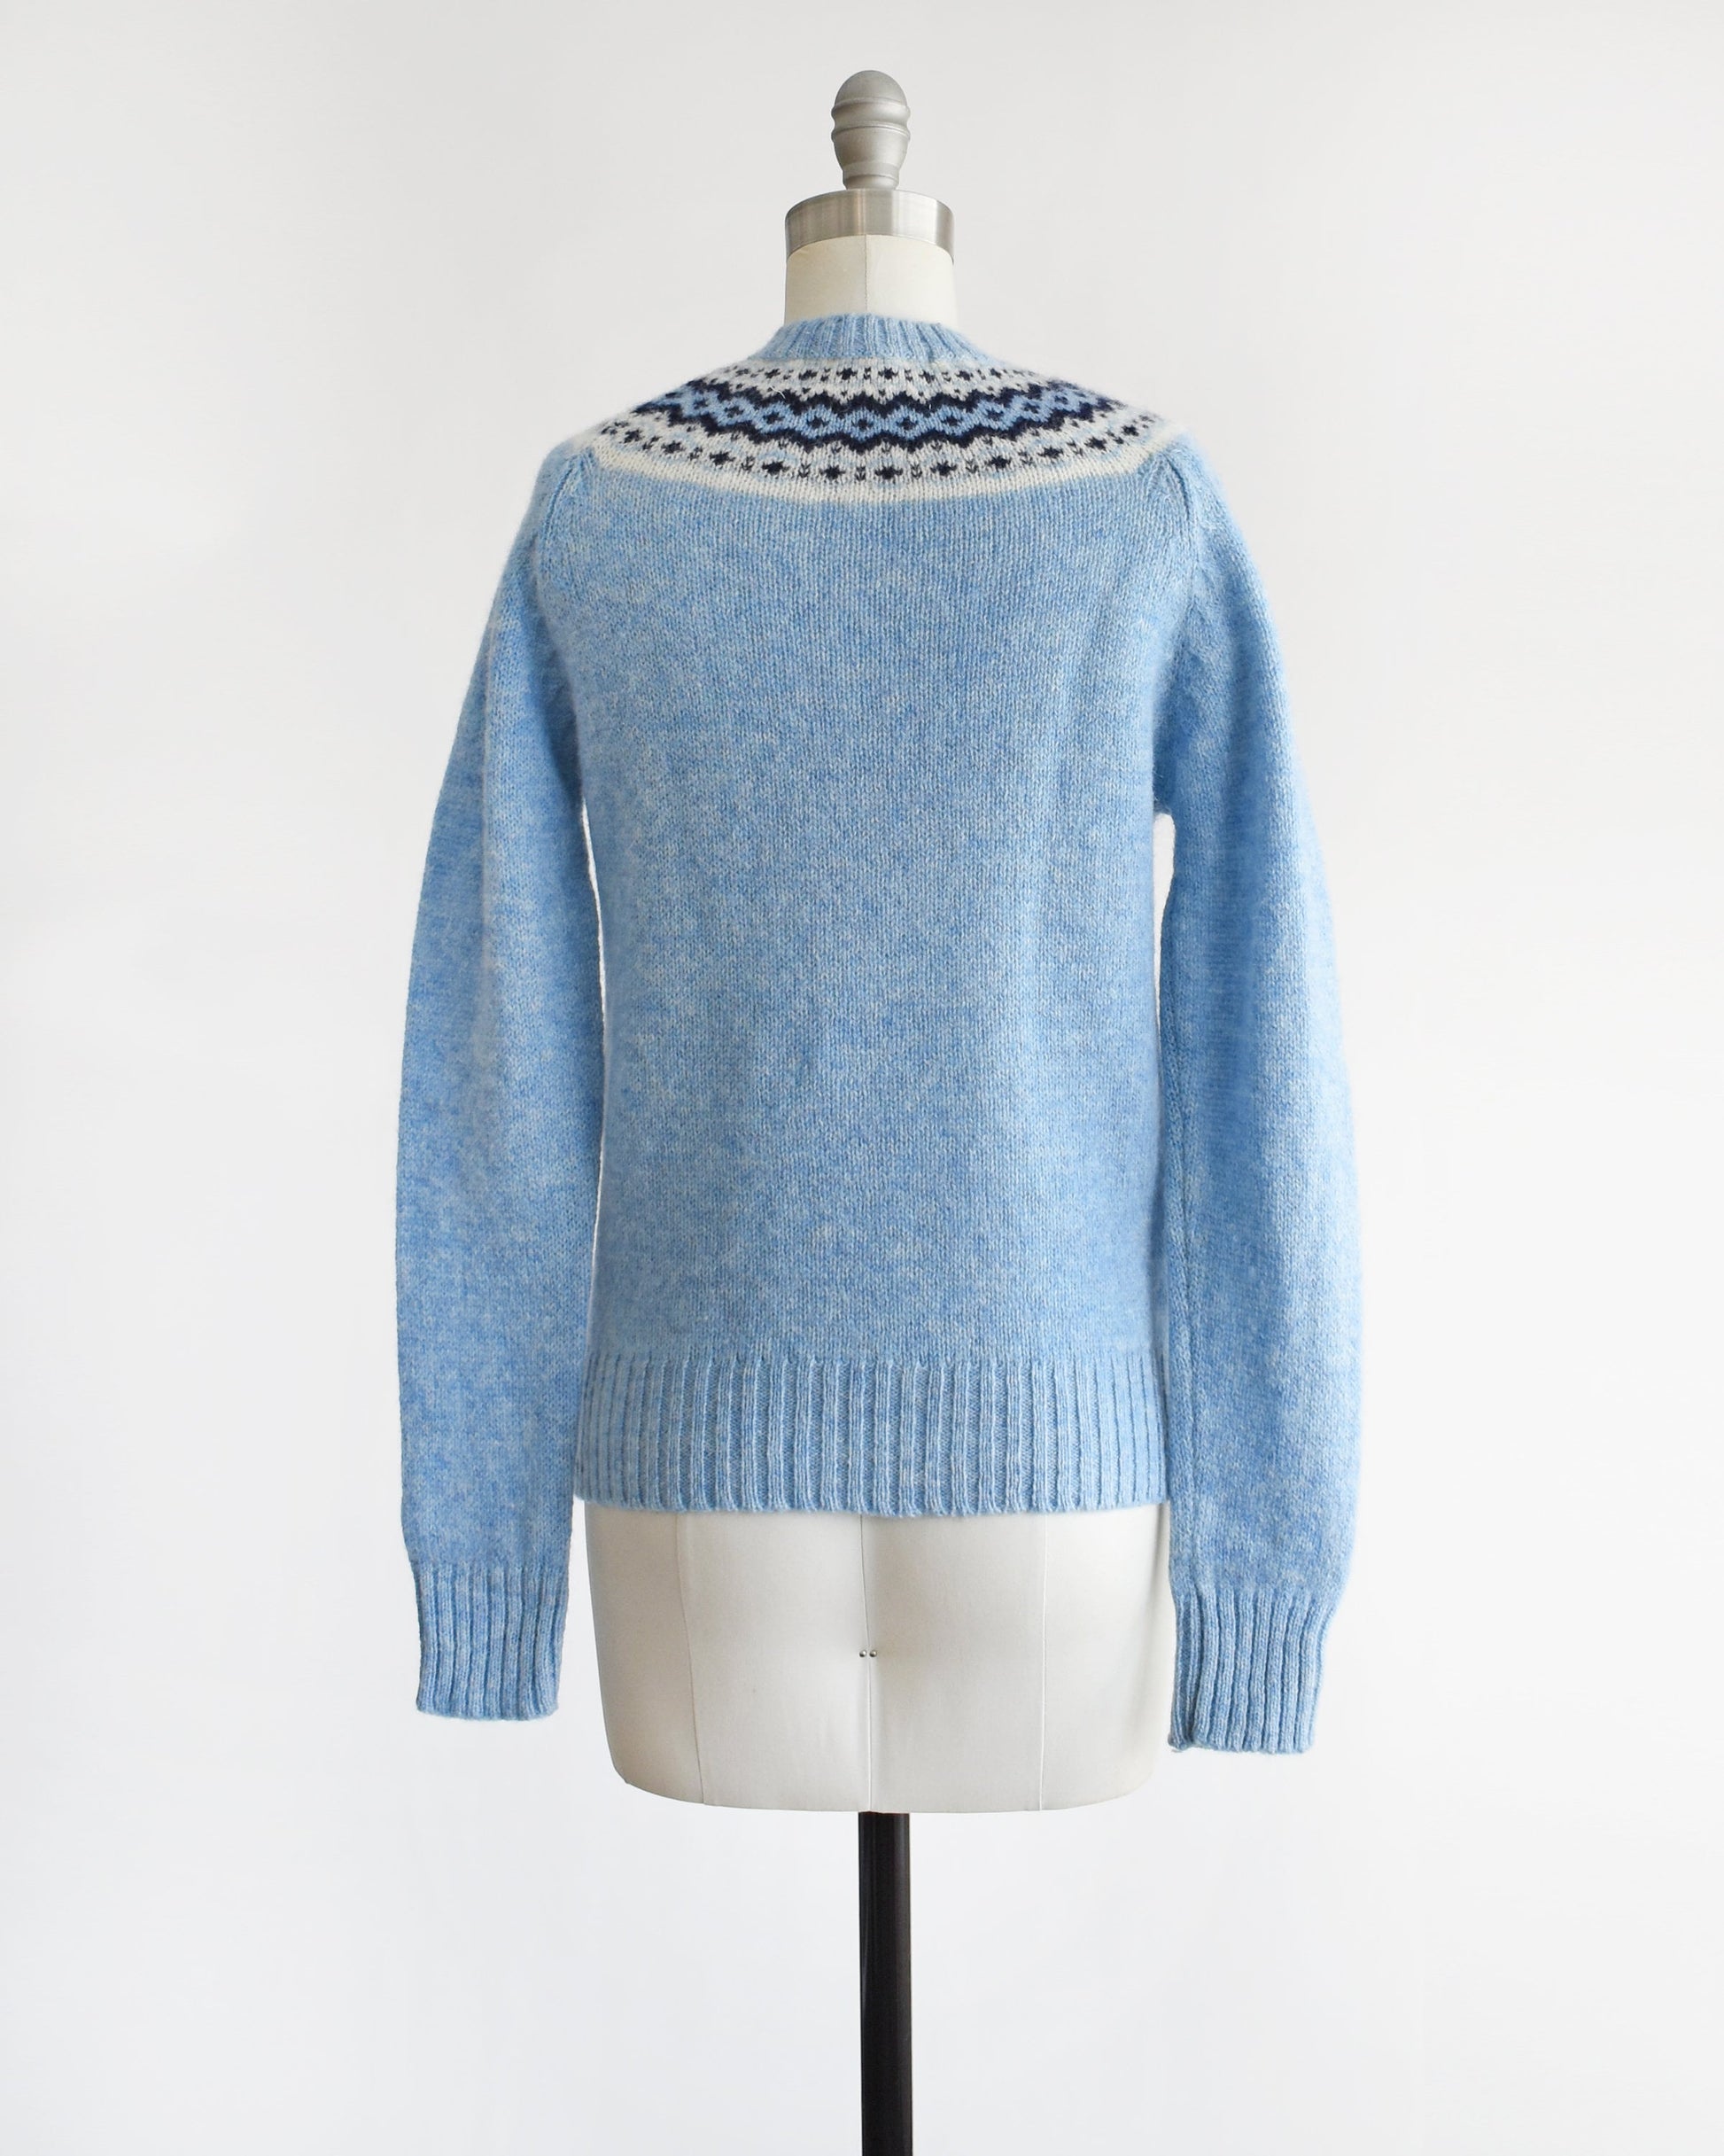 Back view of a vintage 80s blue sweater with a fair isle pattern around the collar. The sweater is modeled on a dress form.